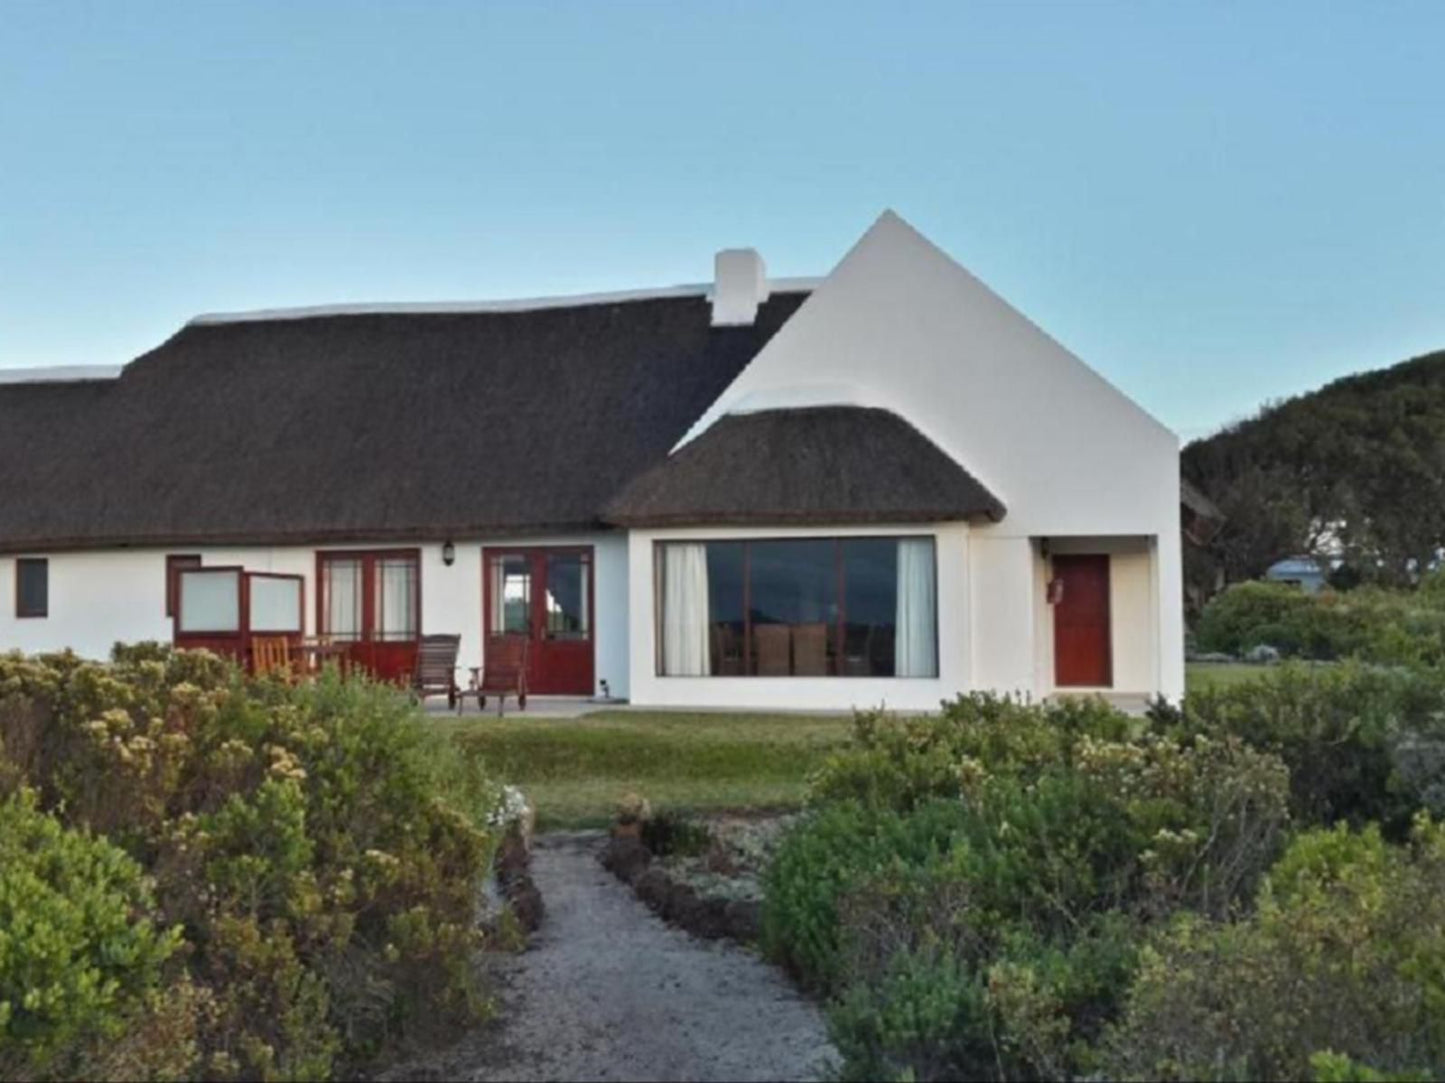 Draaihoek Lodge And Restaurant Elands Bay Western Cape South Africa Building, Architecture, House